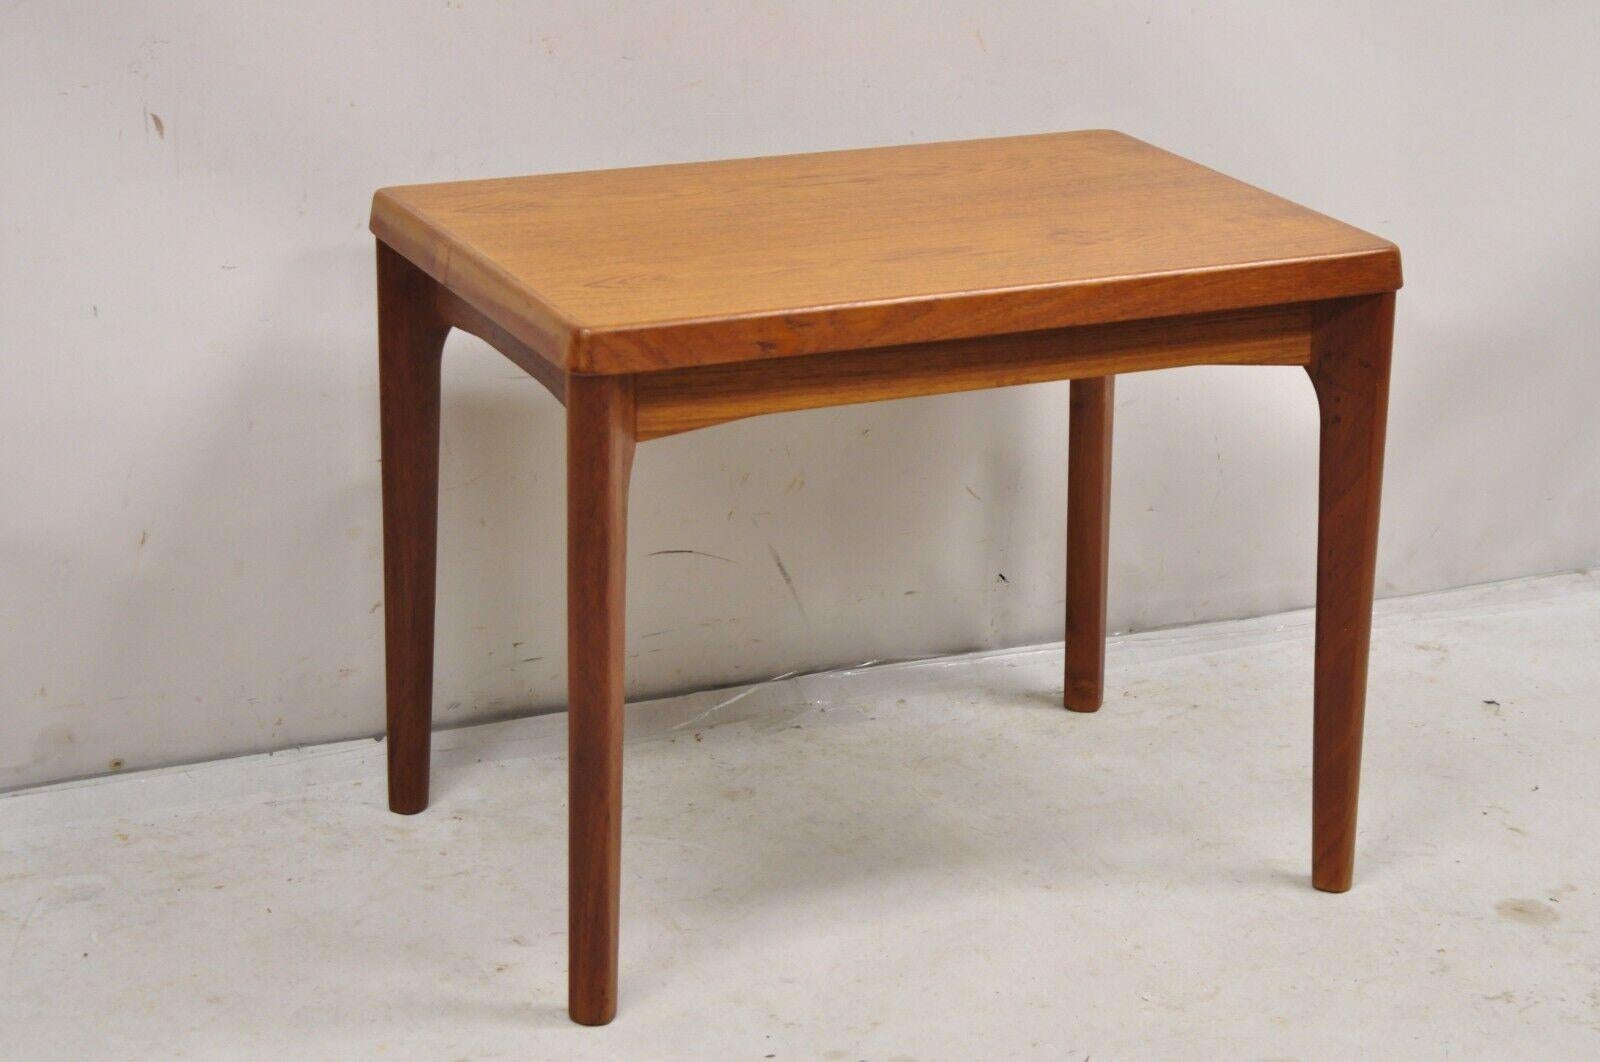 Vejle Stole Møbelfabrik Mid Century Danish Modern Teak Wood Side / End Table. Item features beautiful wood grain, tapered legs, original makers stamp, great style and form. Circa 1960s. Measurements: 20